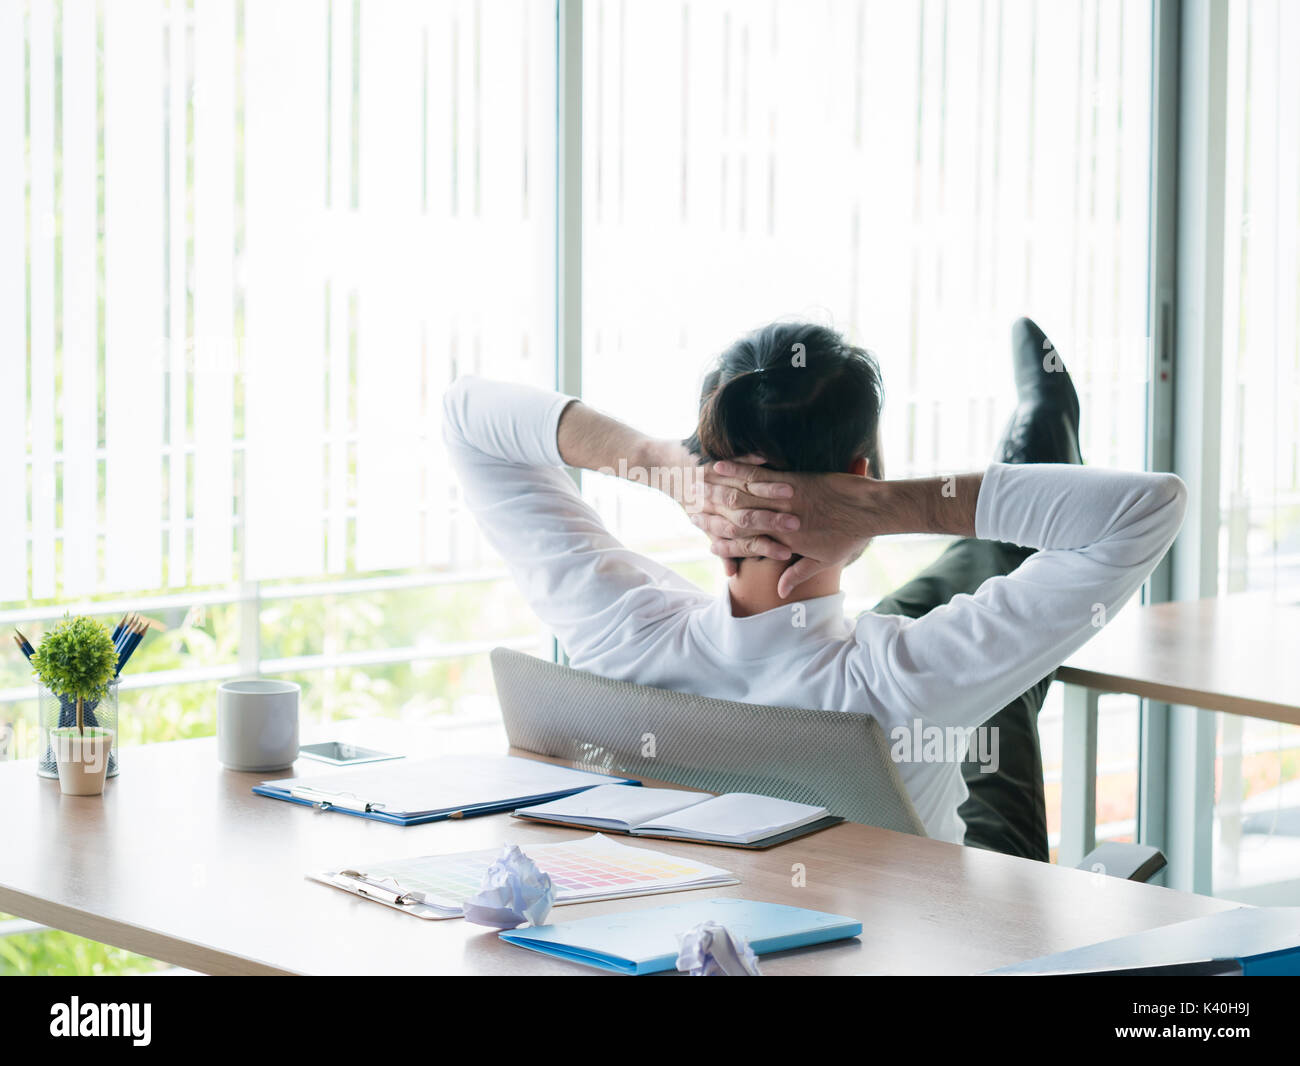 Businessman relaxing concept: businessman sitting with feet up at office desk looking out of window in time rest Stock Photo